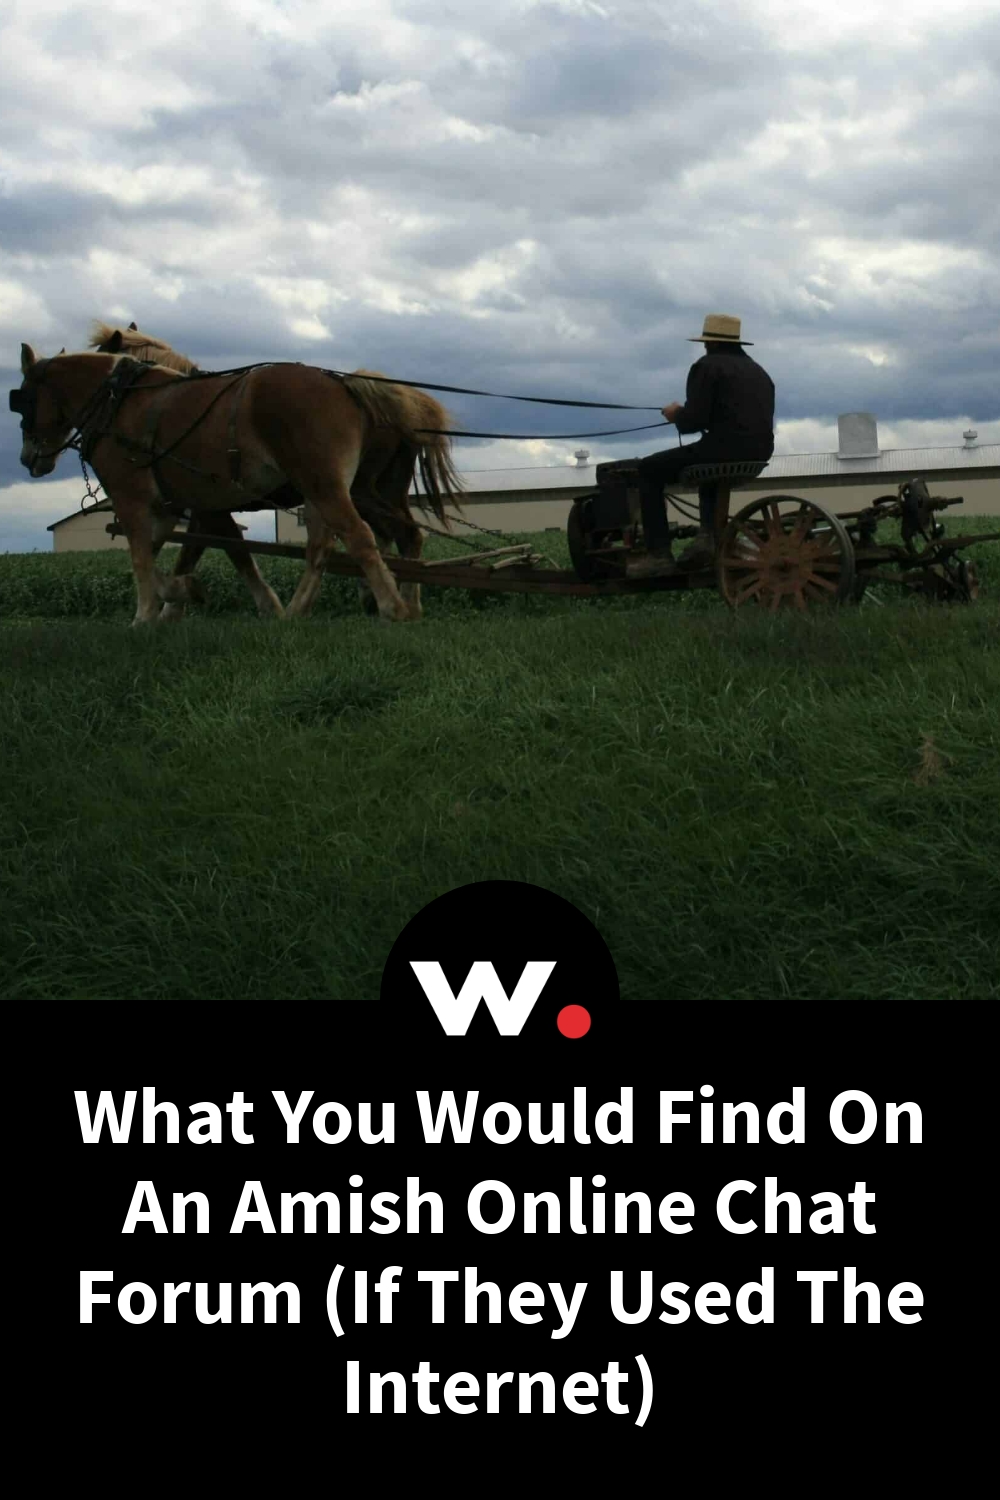 What You Would Find On An Amish Online Chat Forum (If They Used The Internet)